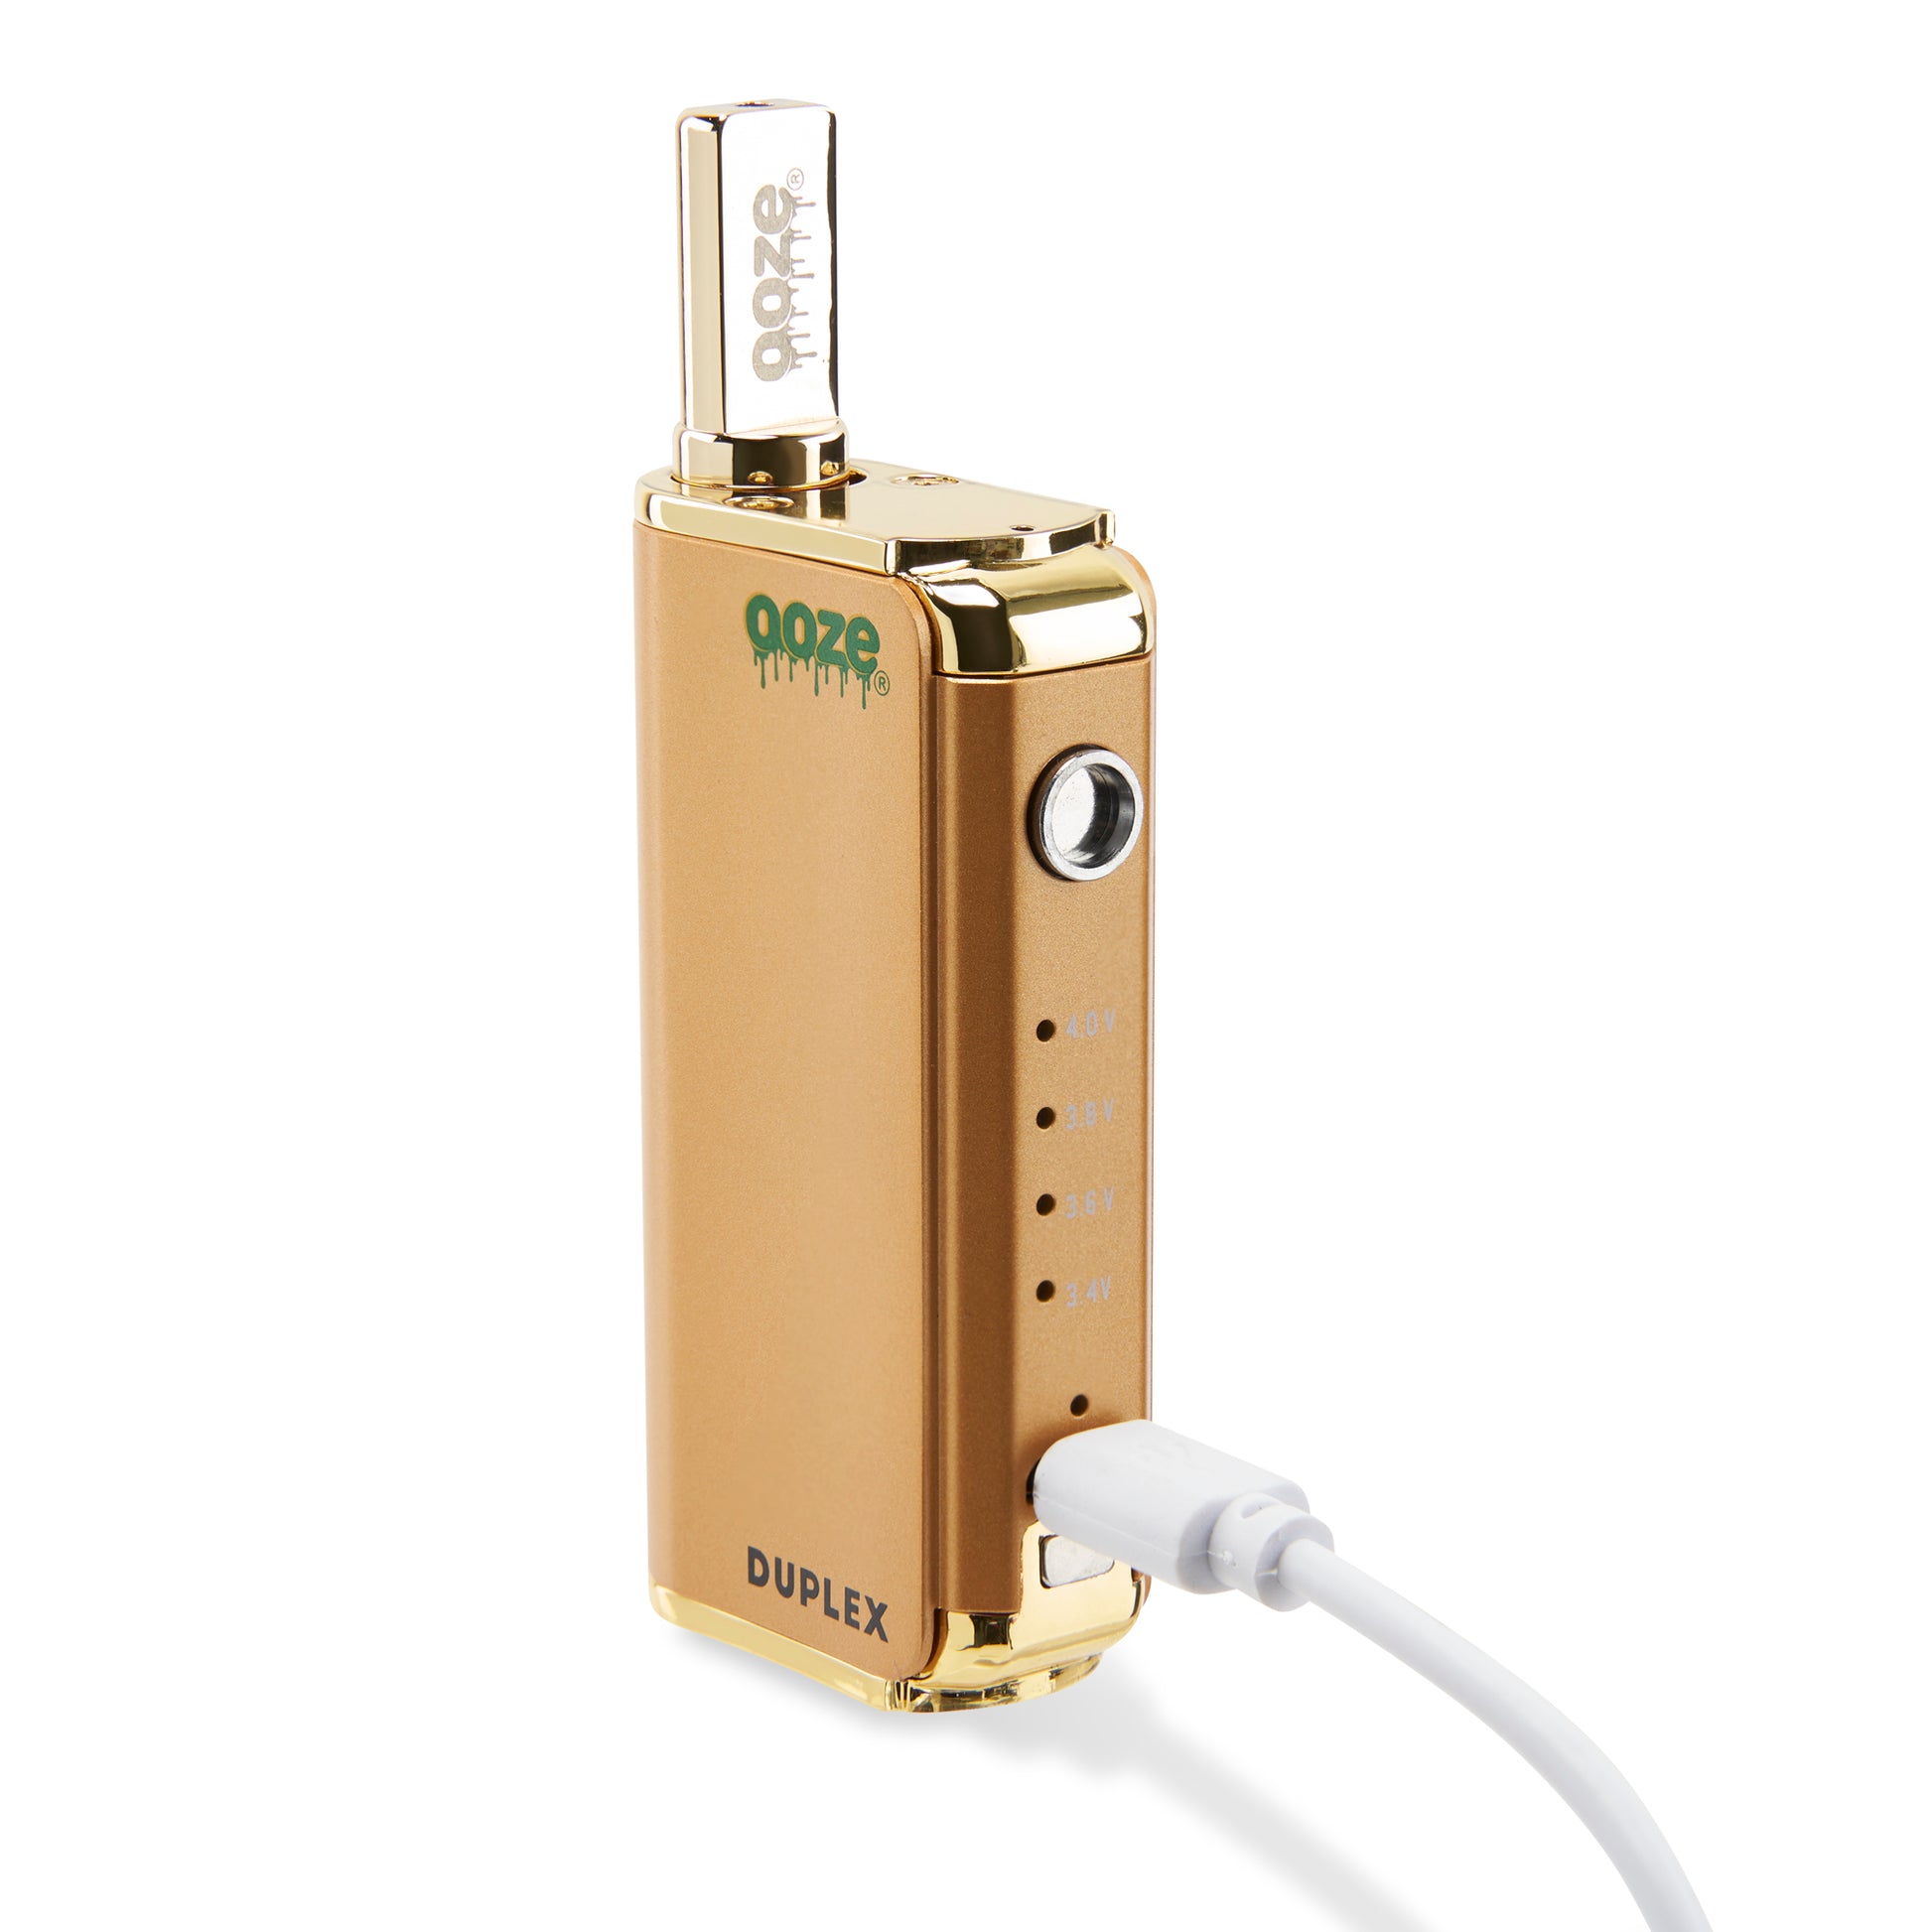 The Lucky Gold Ooze Duplex Pro Vaporizer is shown with the magnetic button removed and the type-c charging cable is plugged in.